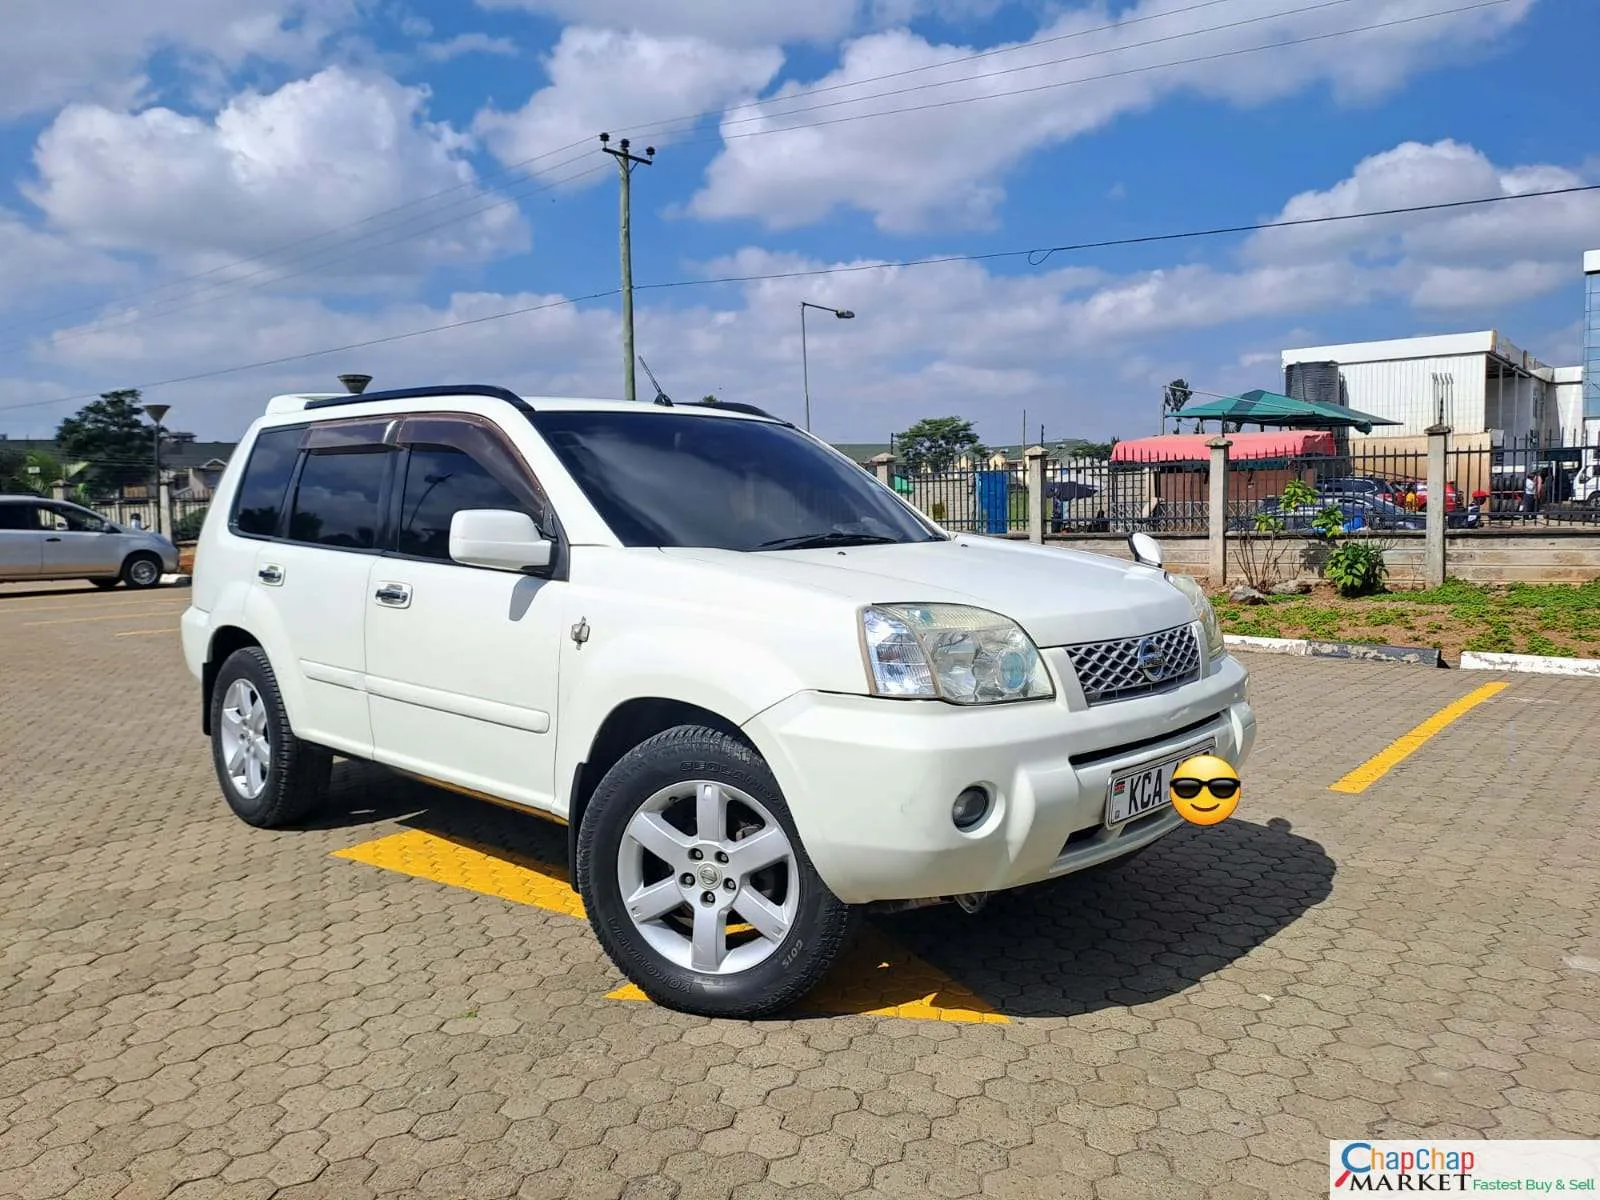 Nissan XTRAIL QUICK SALE You Pay 30% Deposit Trade in Ok HIRE PURCHASE INSTALLMENTS KENYA (SOLD)